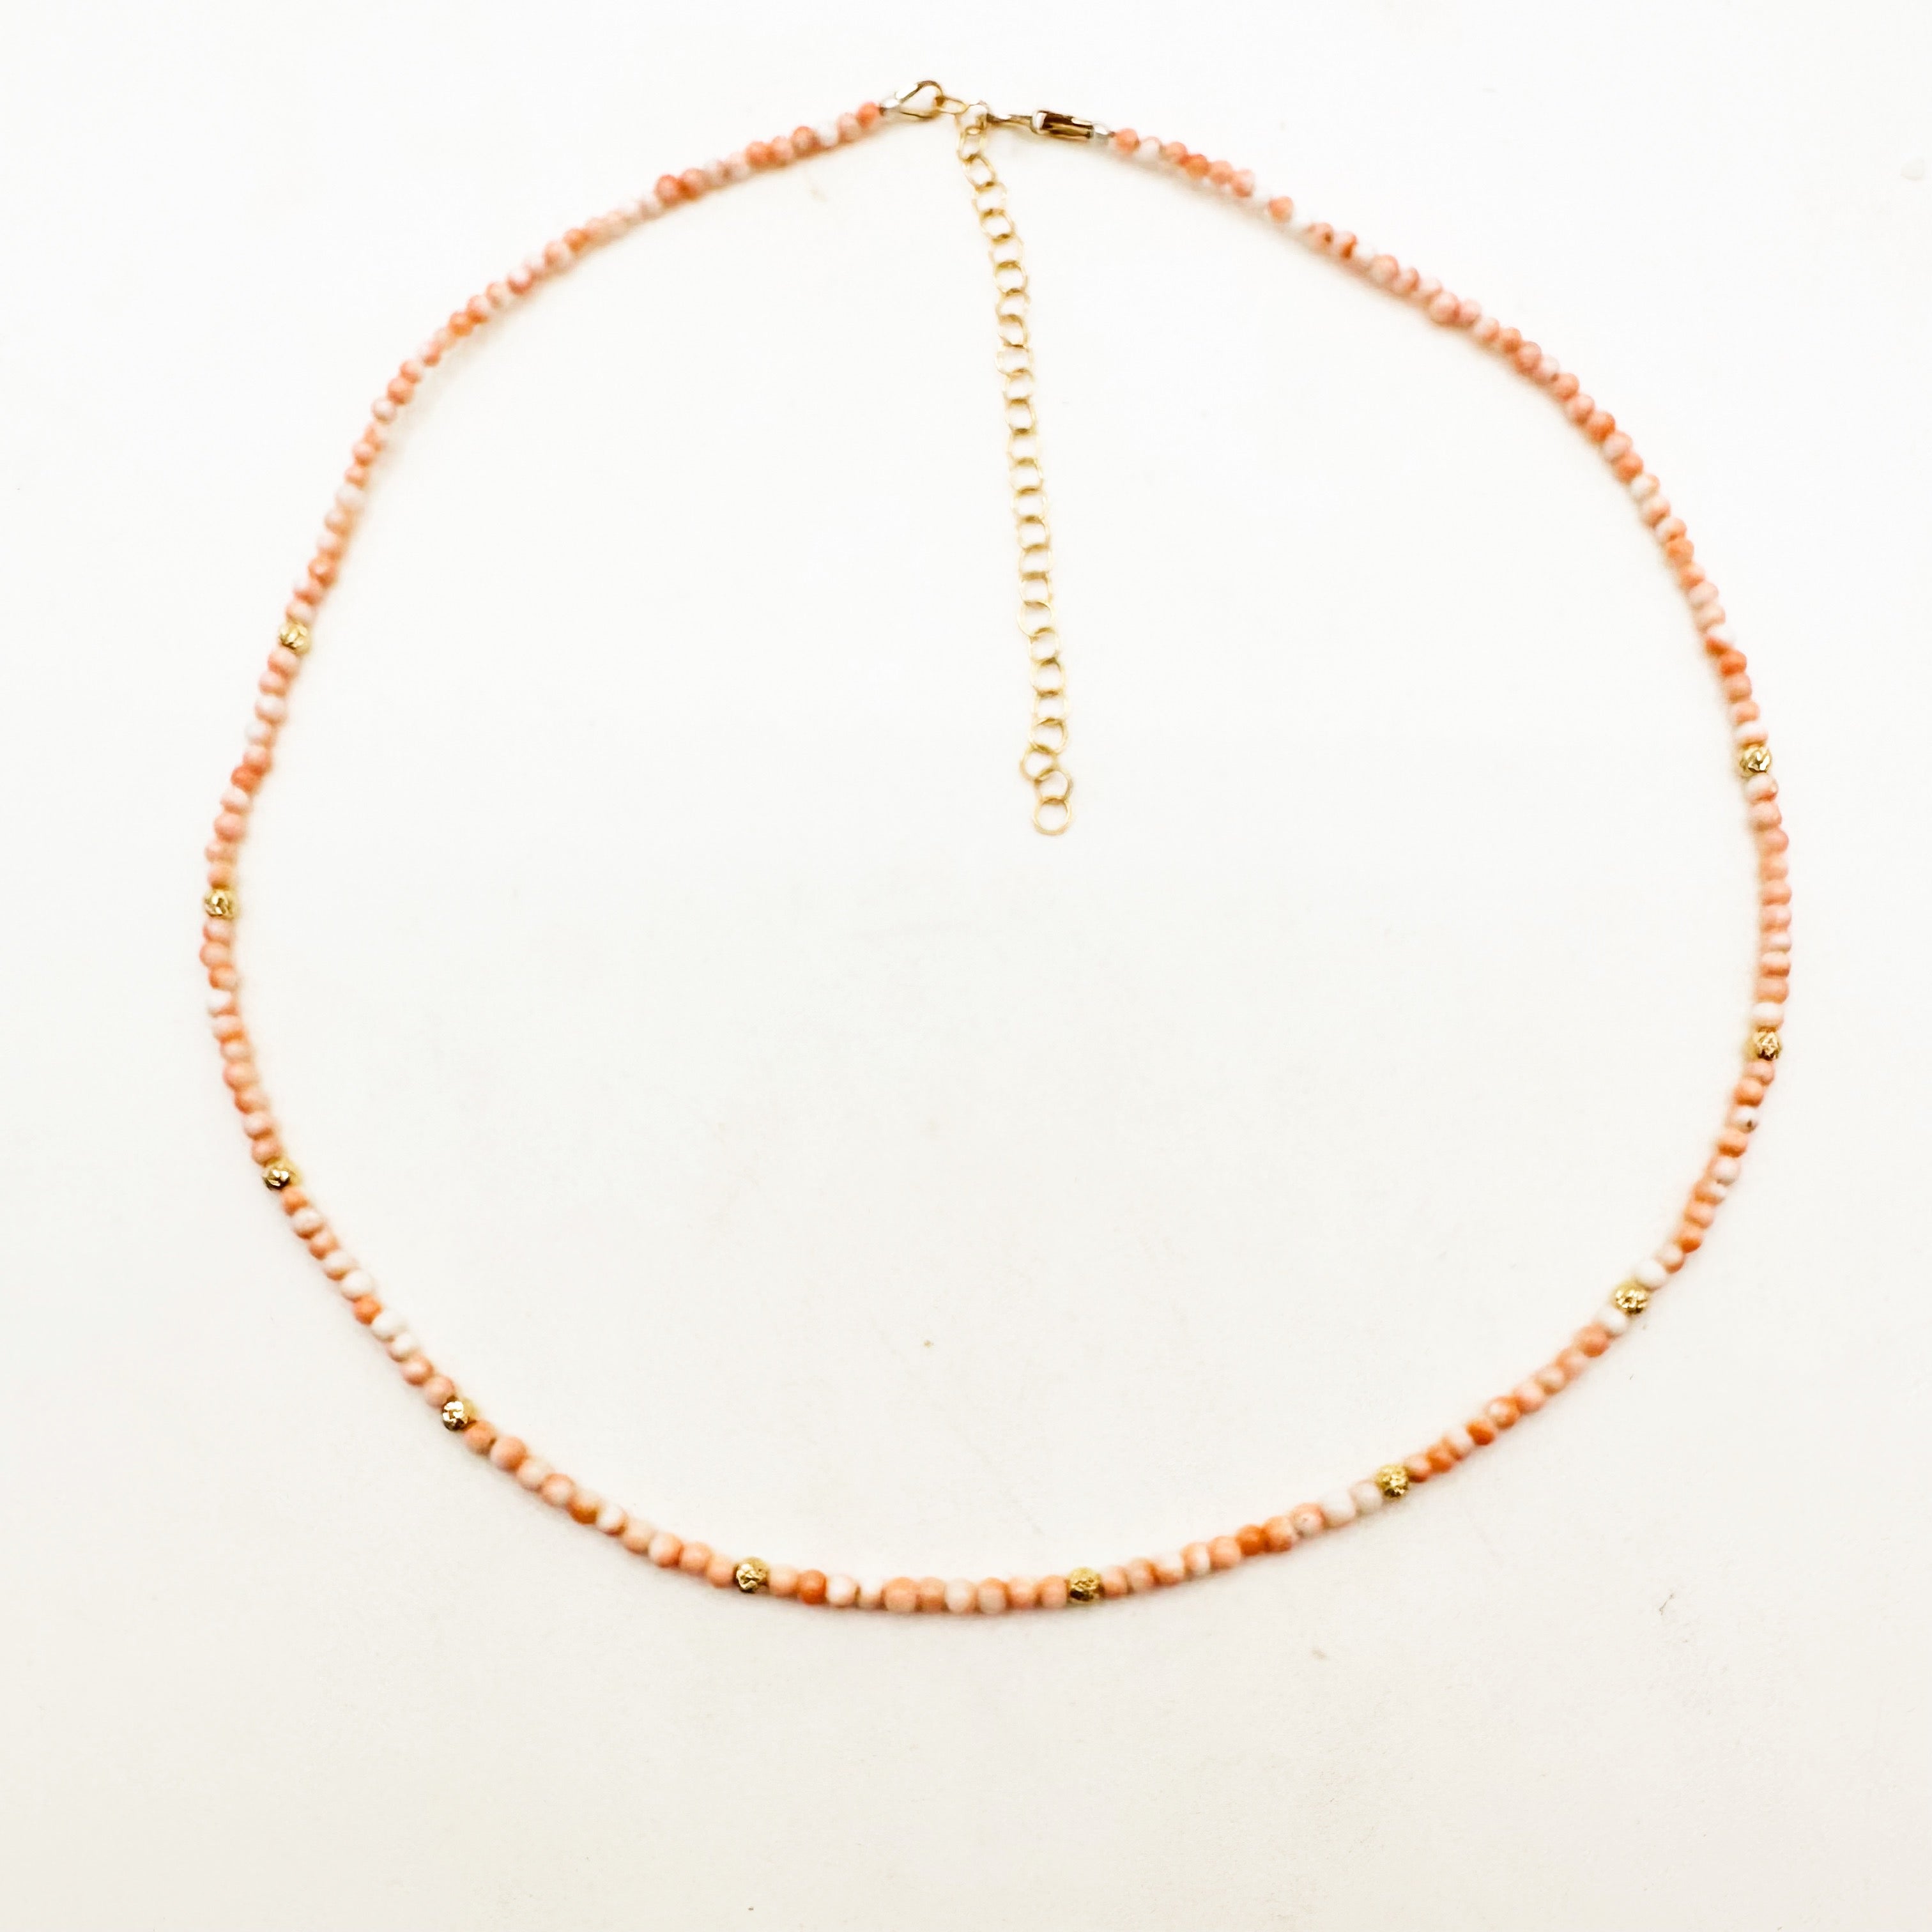 2.5MM BEADED CORAL NECKLACE GIFT